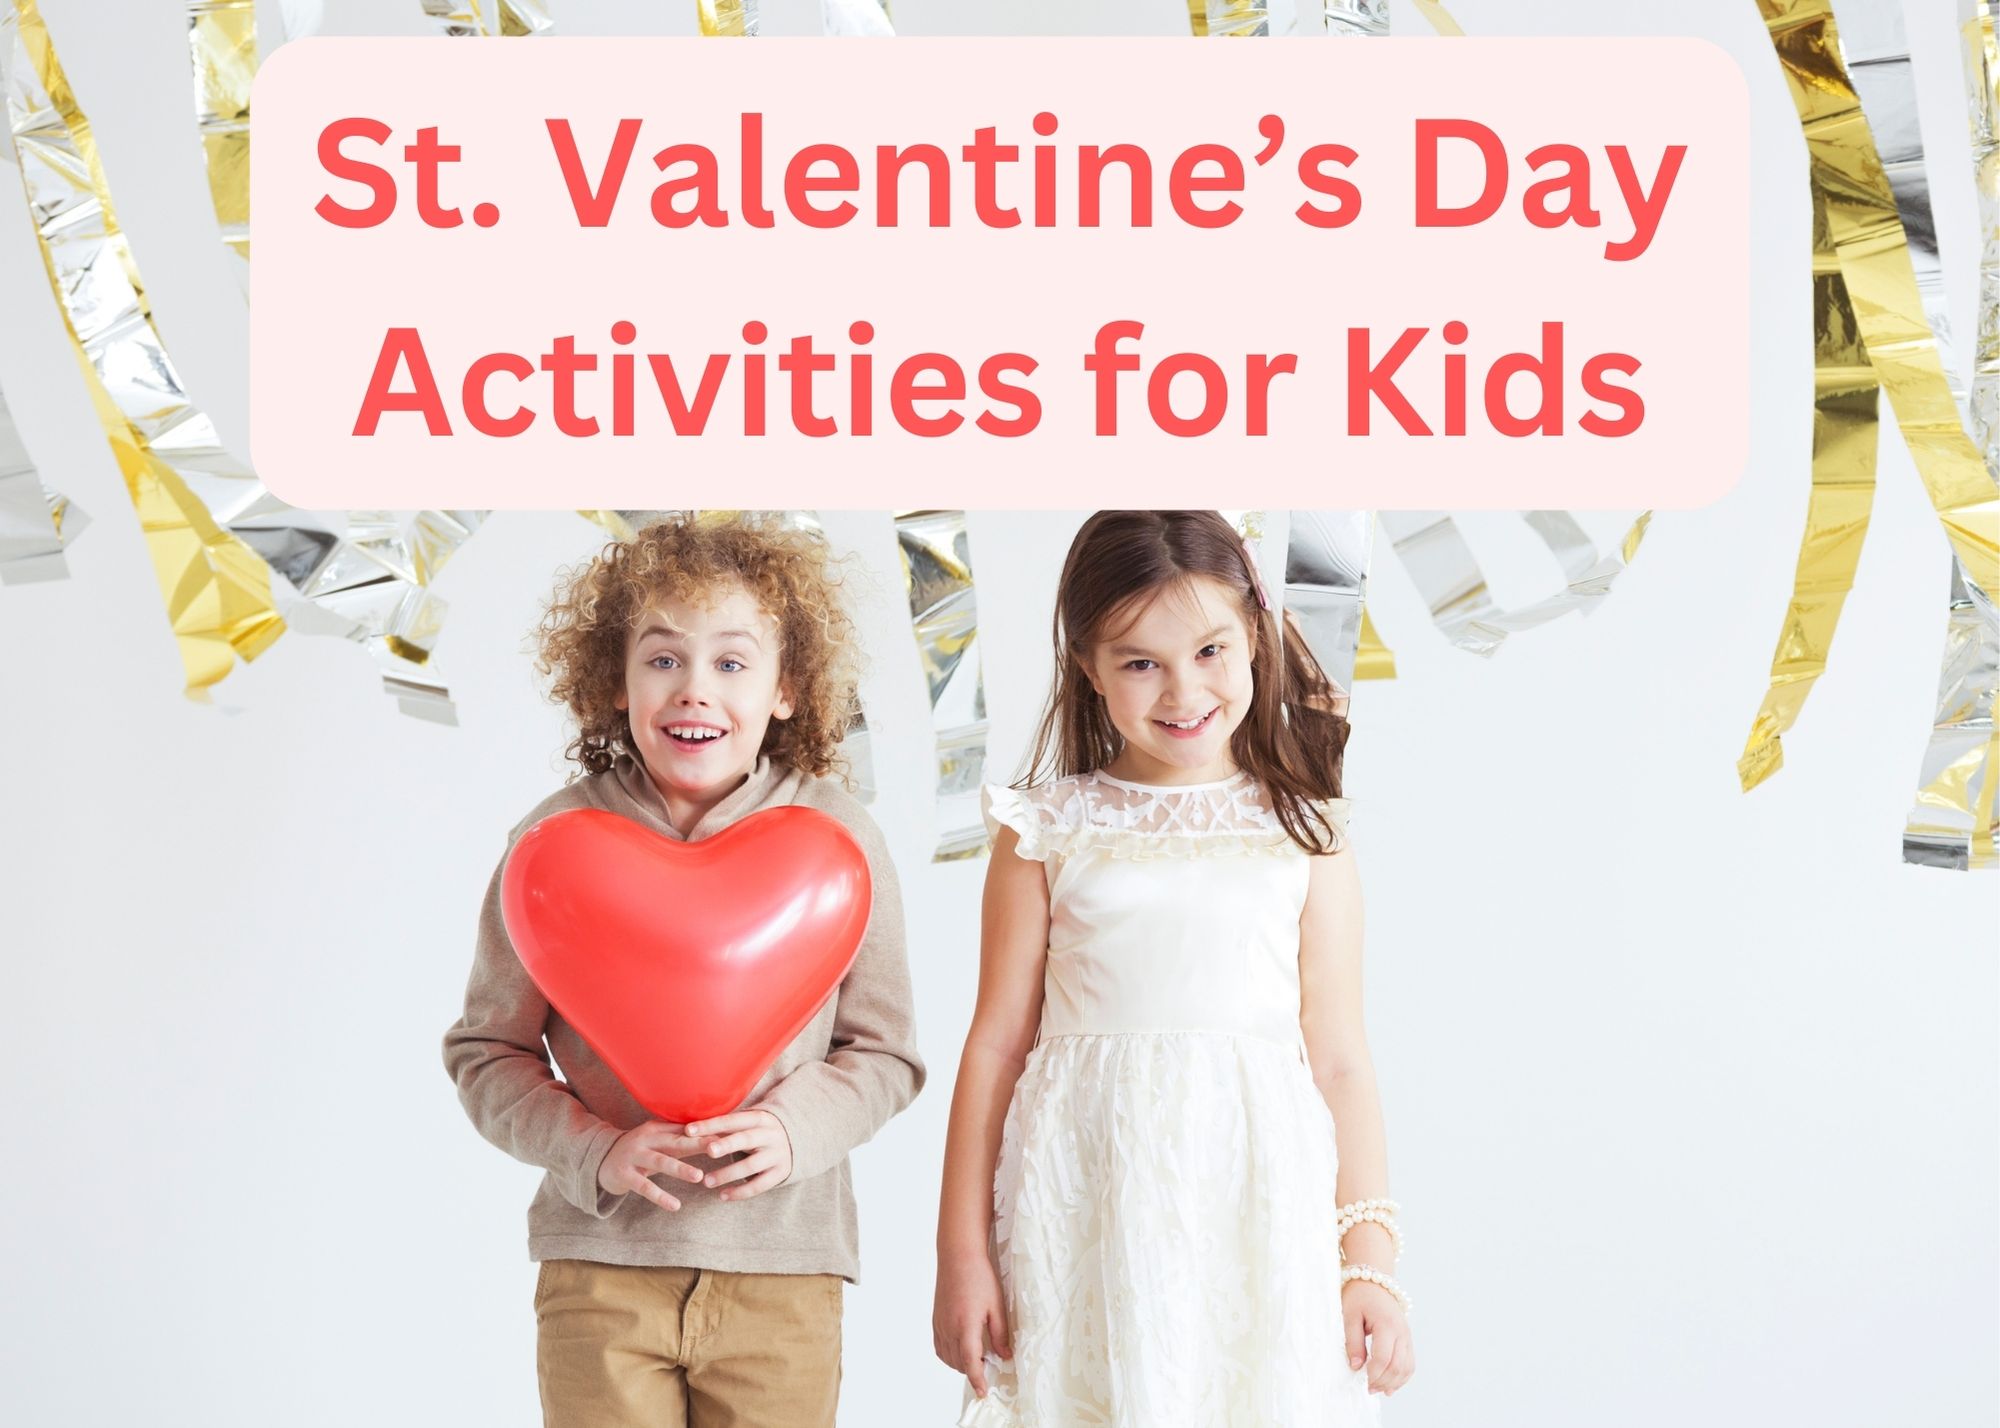 St. Valentine’s Day Activities for Kids